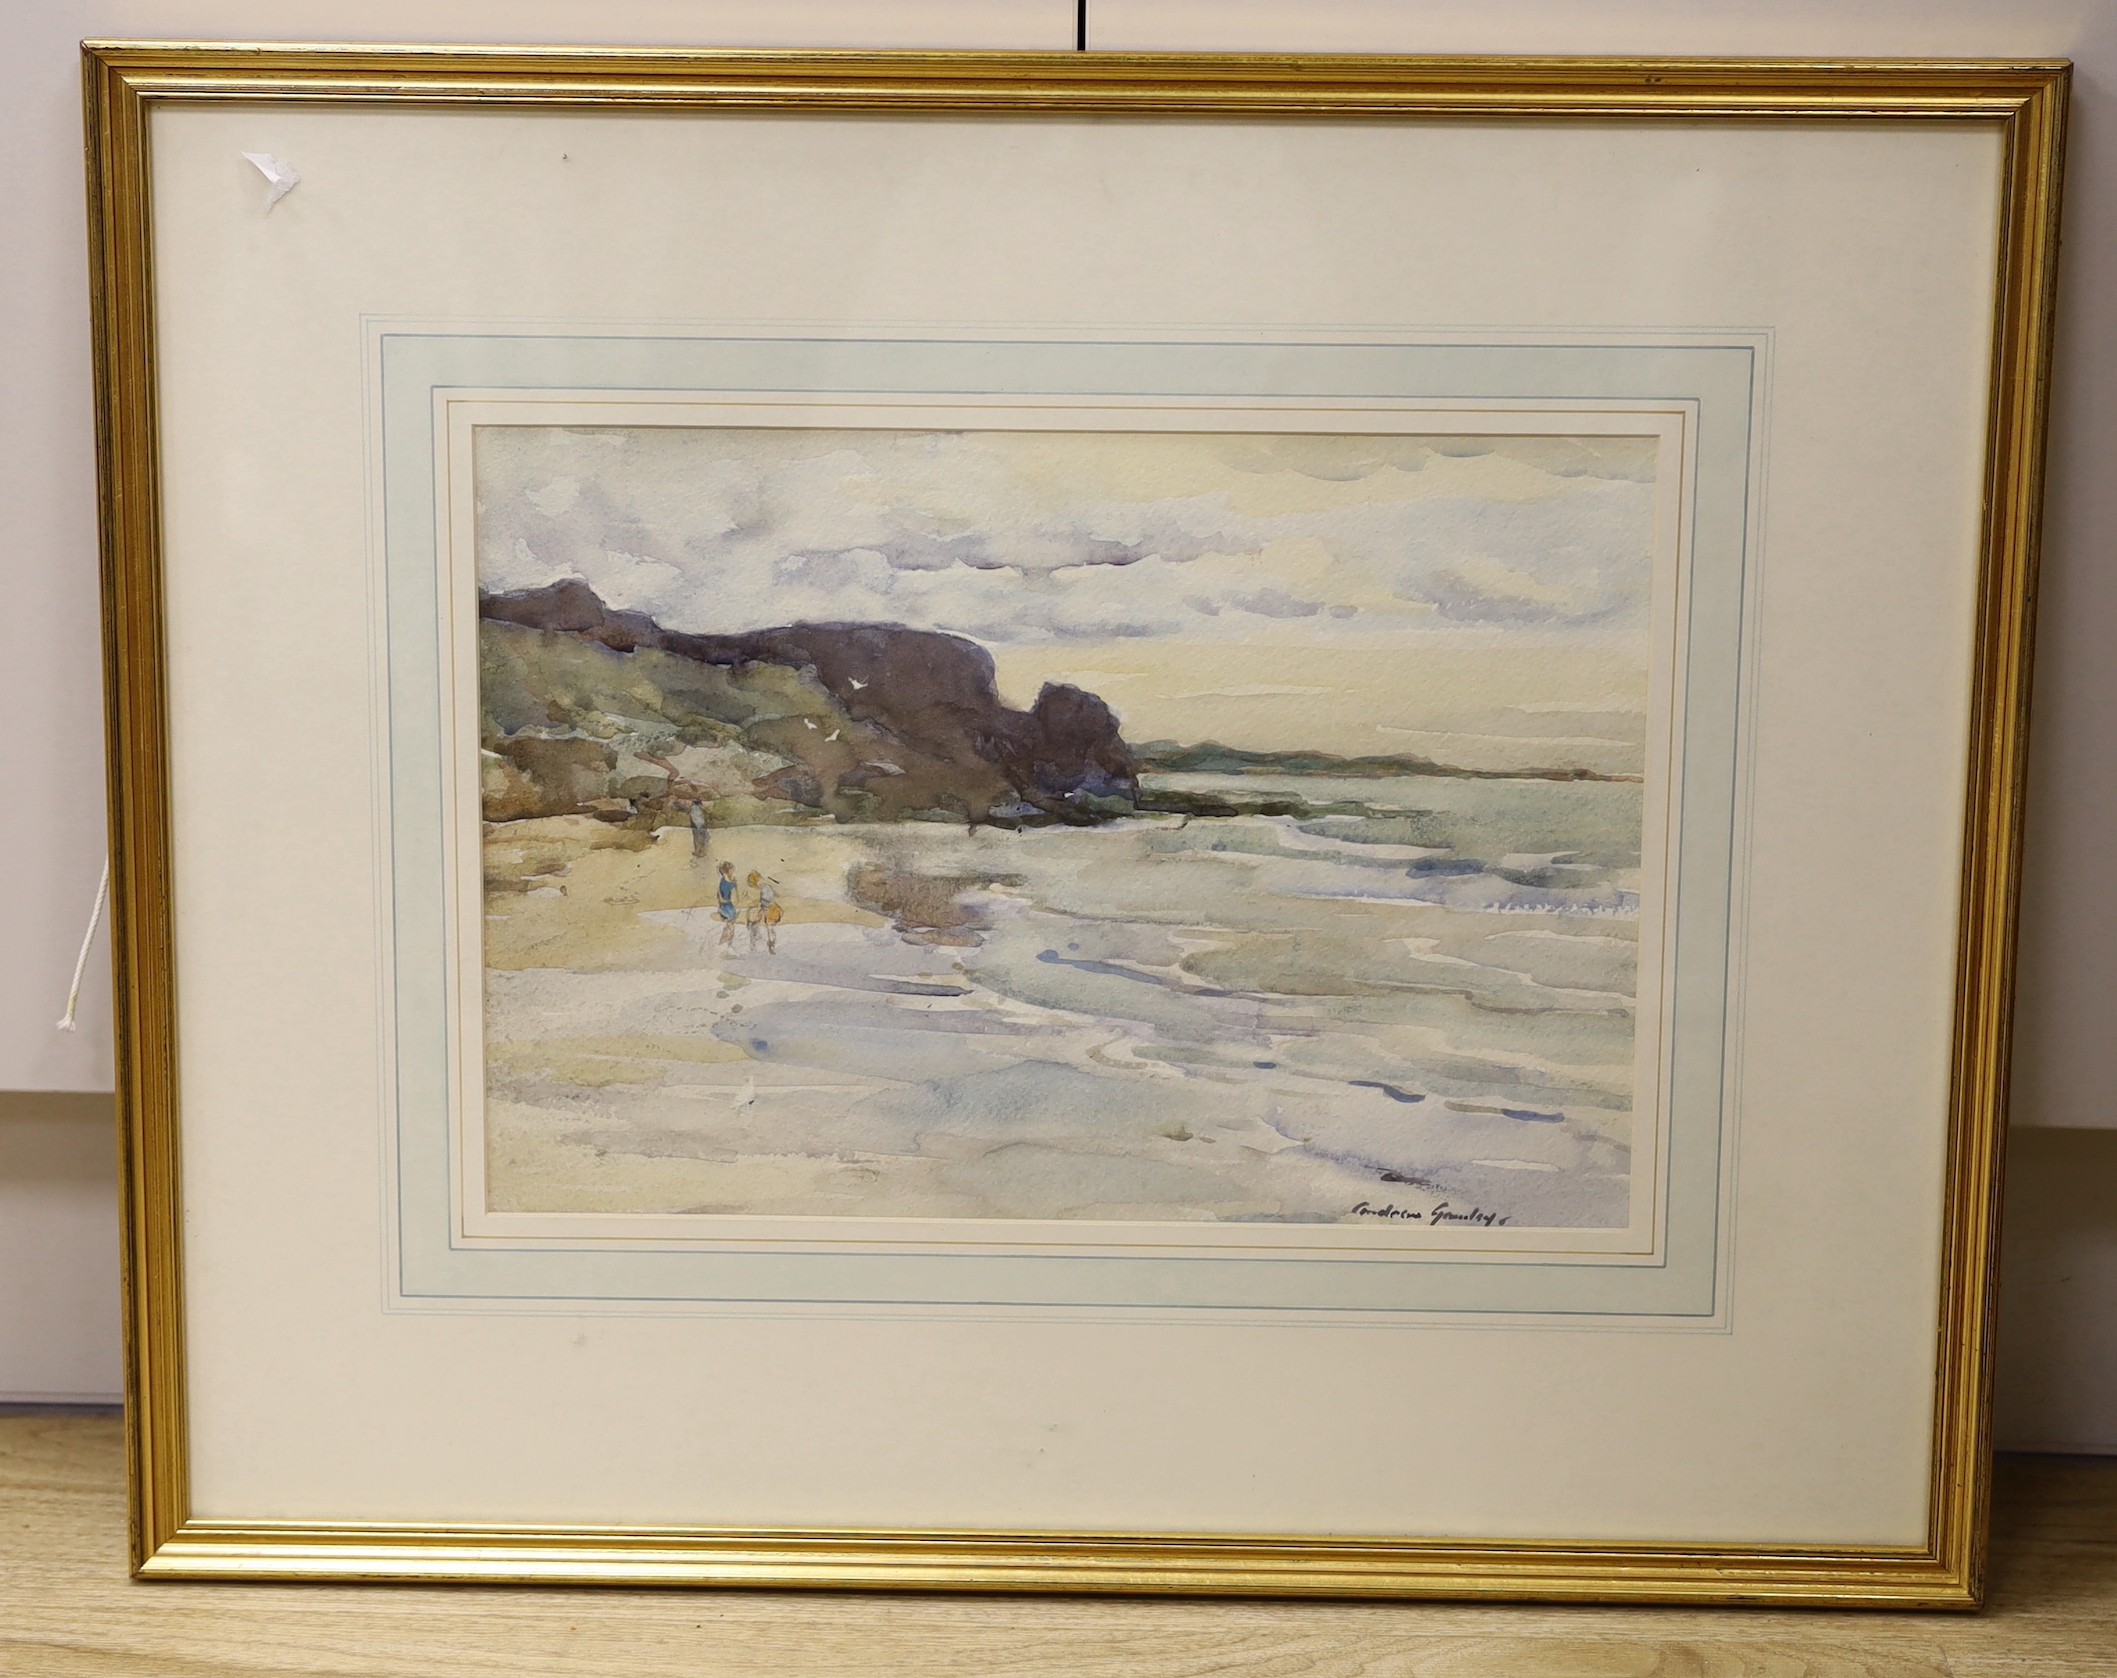 Andrew Archer Gamley, R.S.W. (1869-1949), watercolour, 'West Shore, Gullane', signed, 27 x 39cm